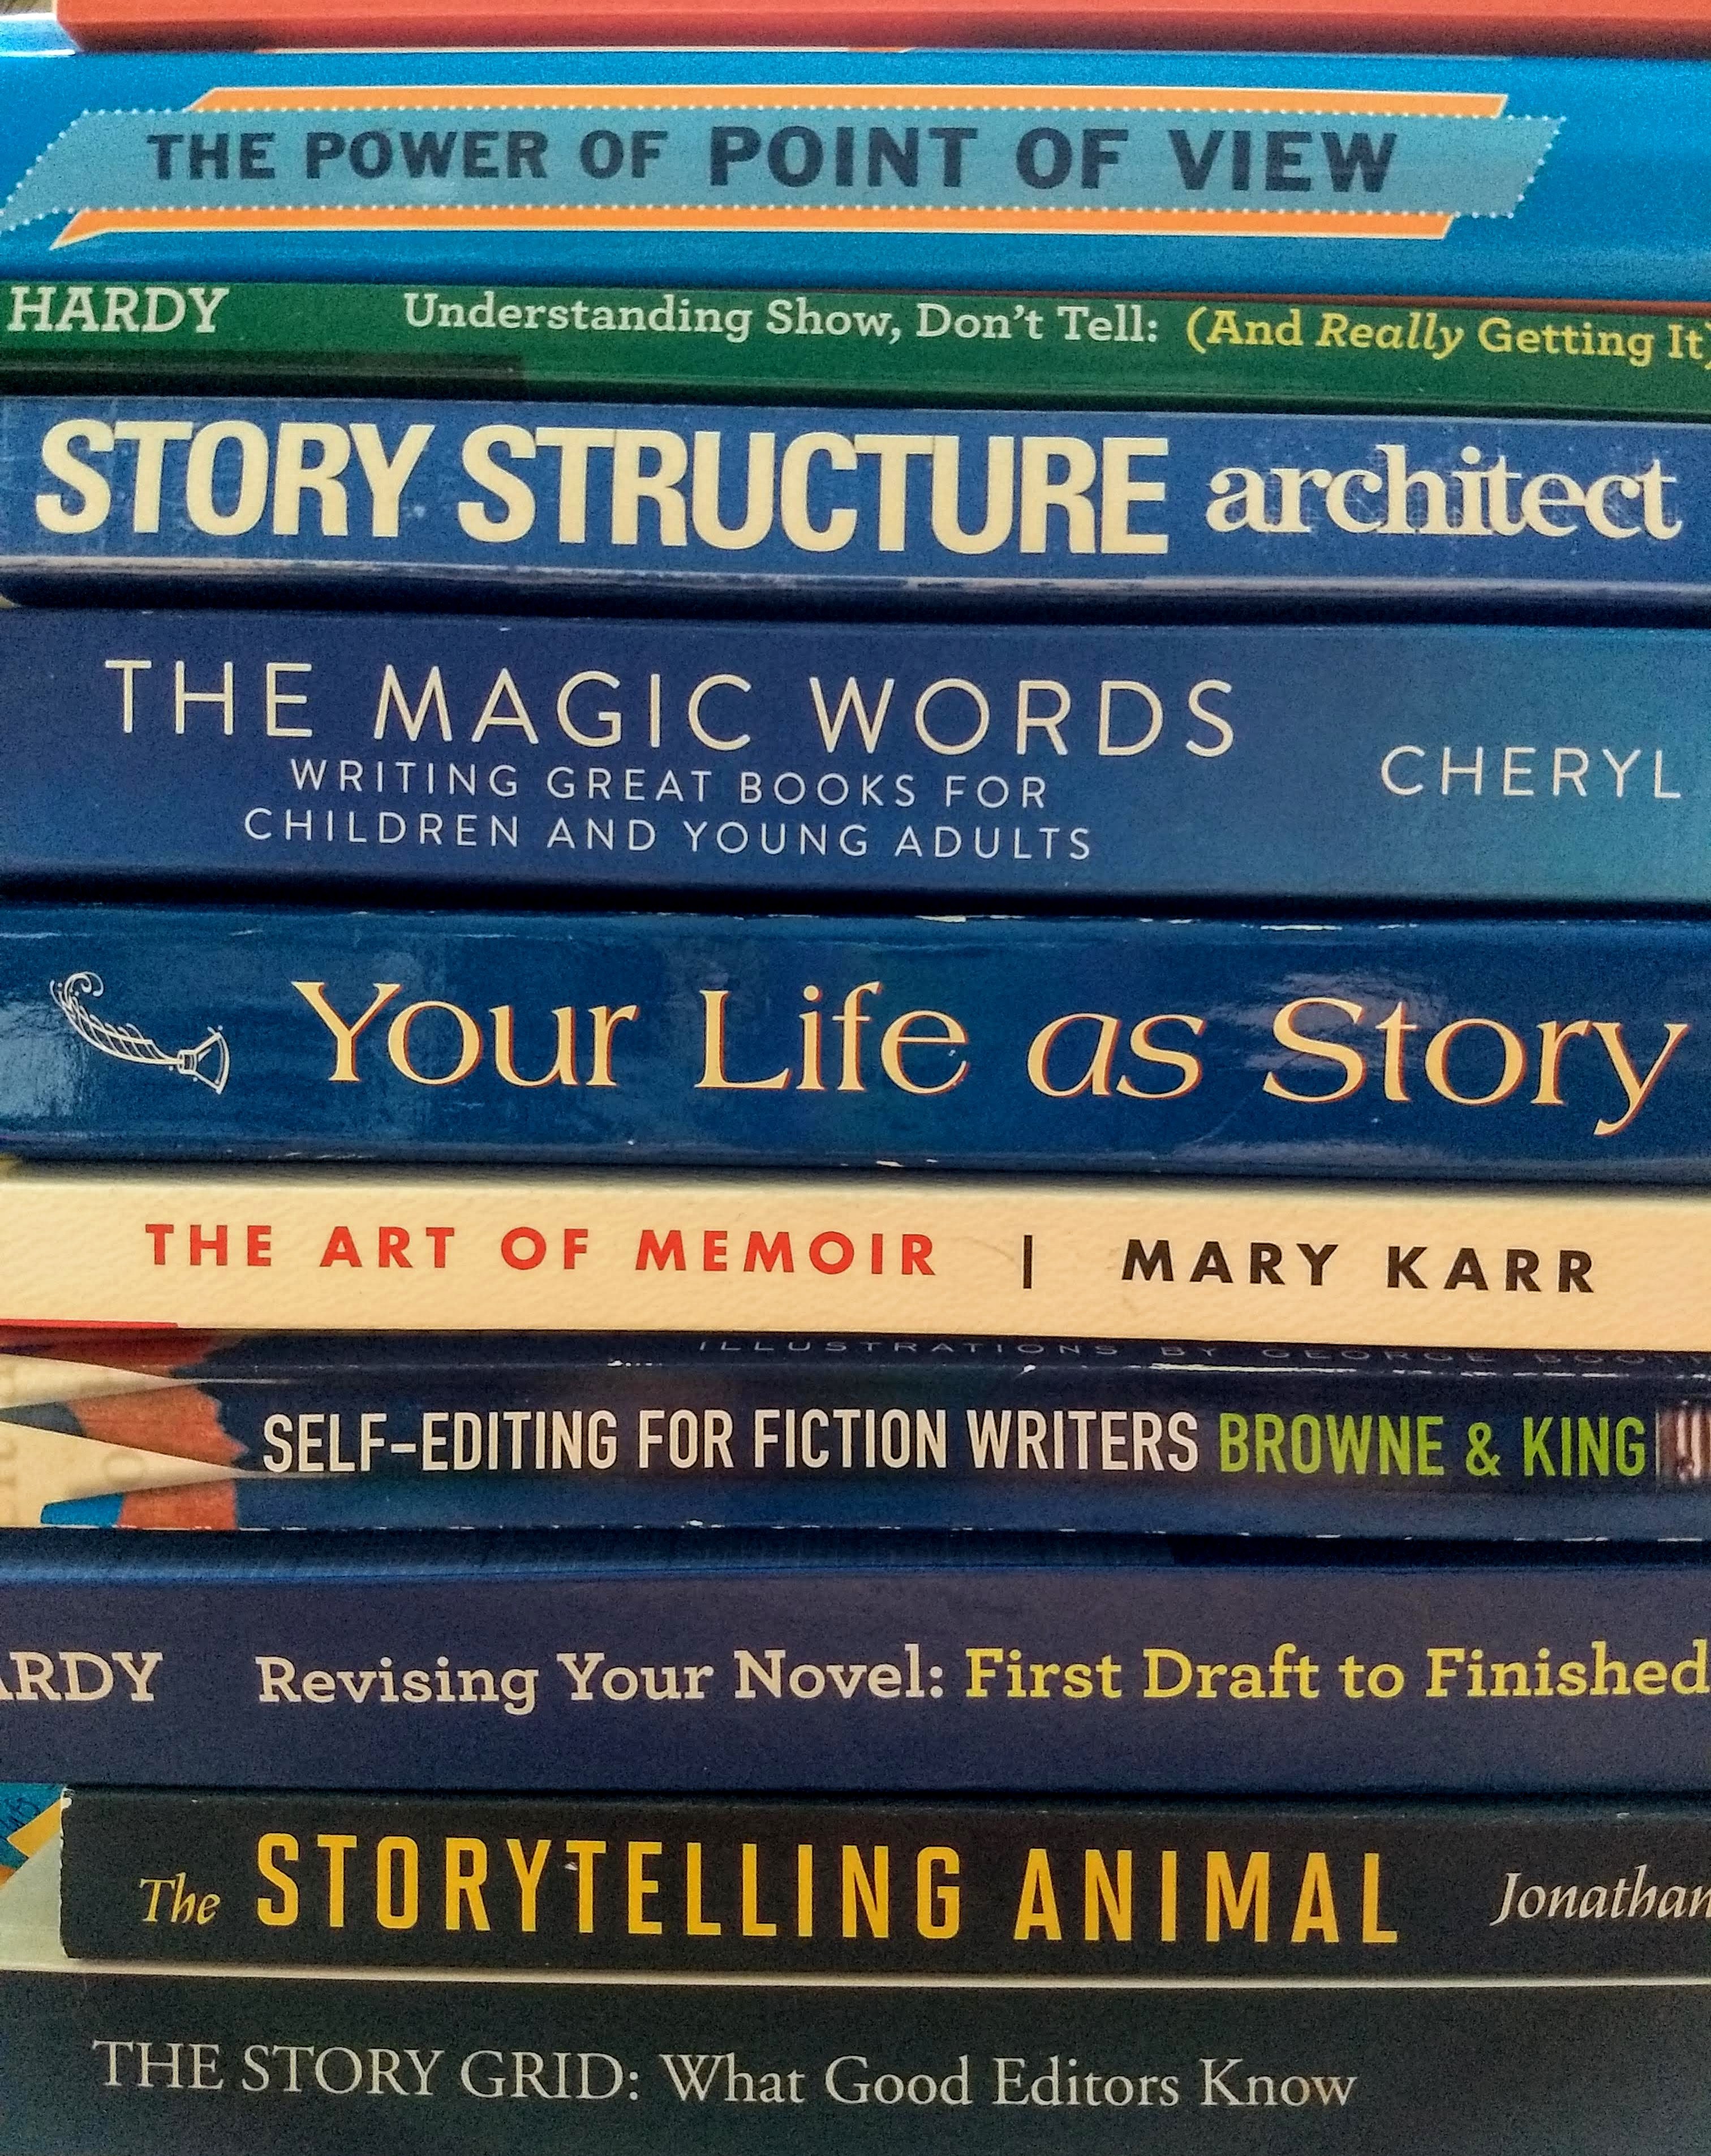 Developmental editing: Recommended reading